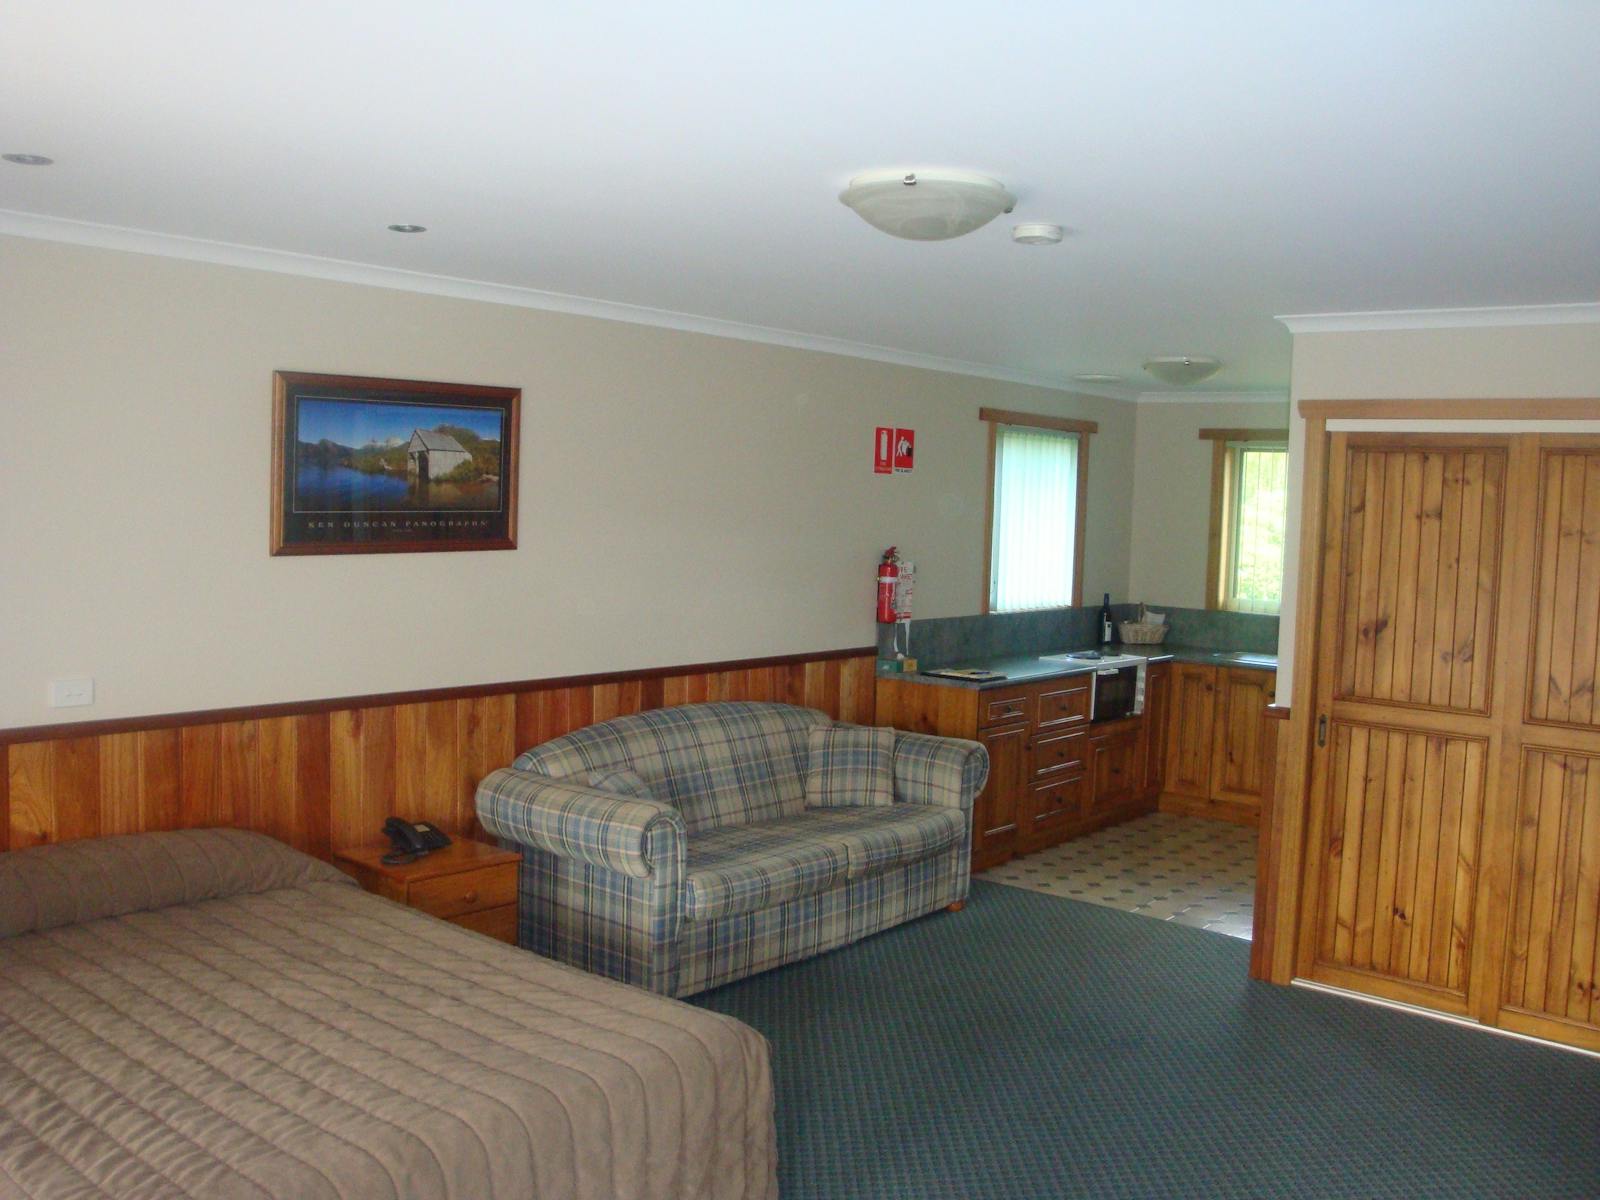 This room contains 2 Queen beds & 1 set of bunks